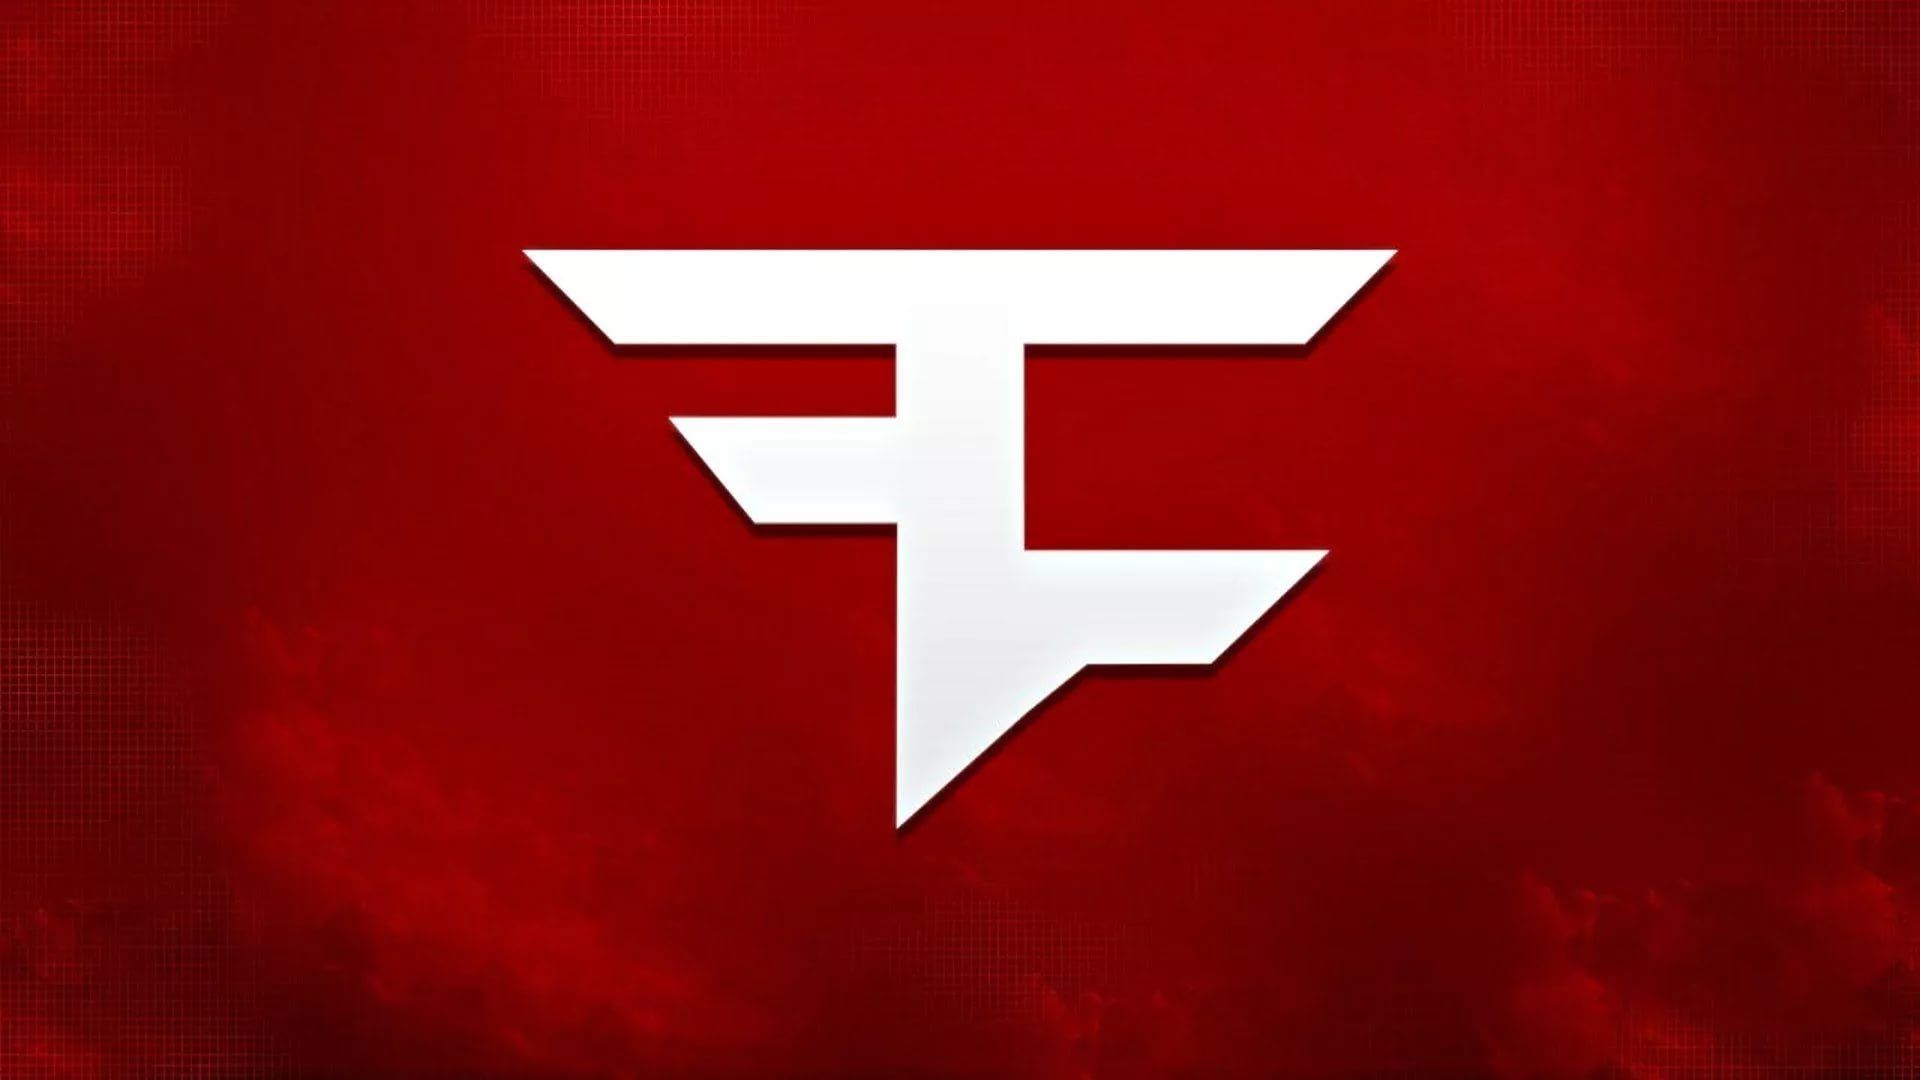 Faze Rug download free wallpapers for pc in hd